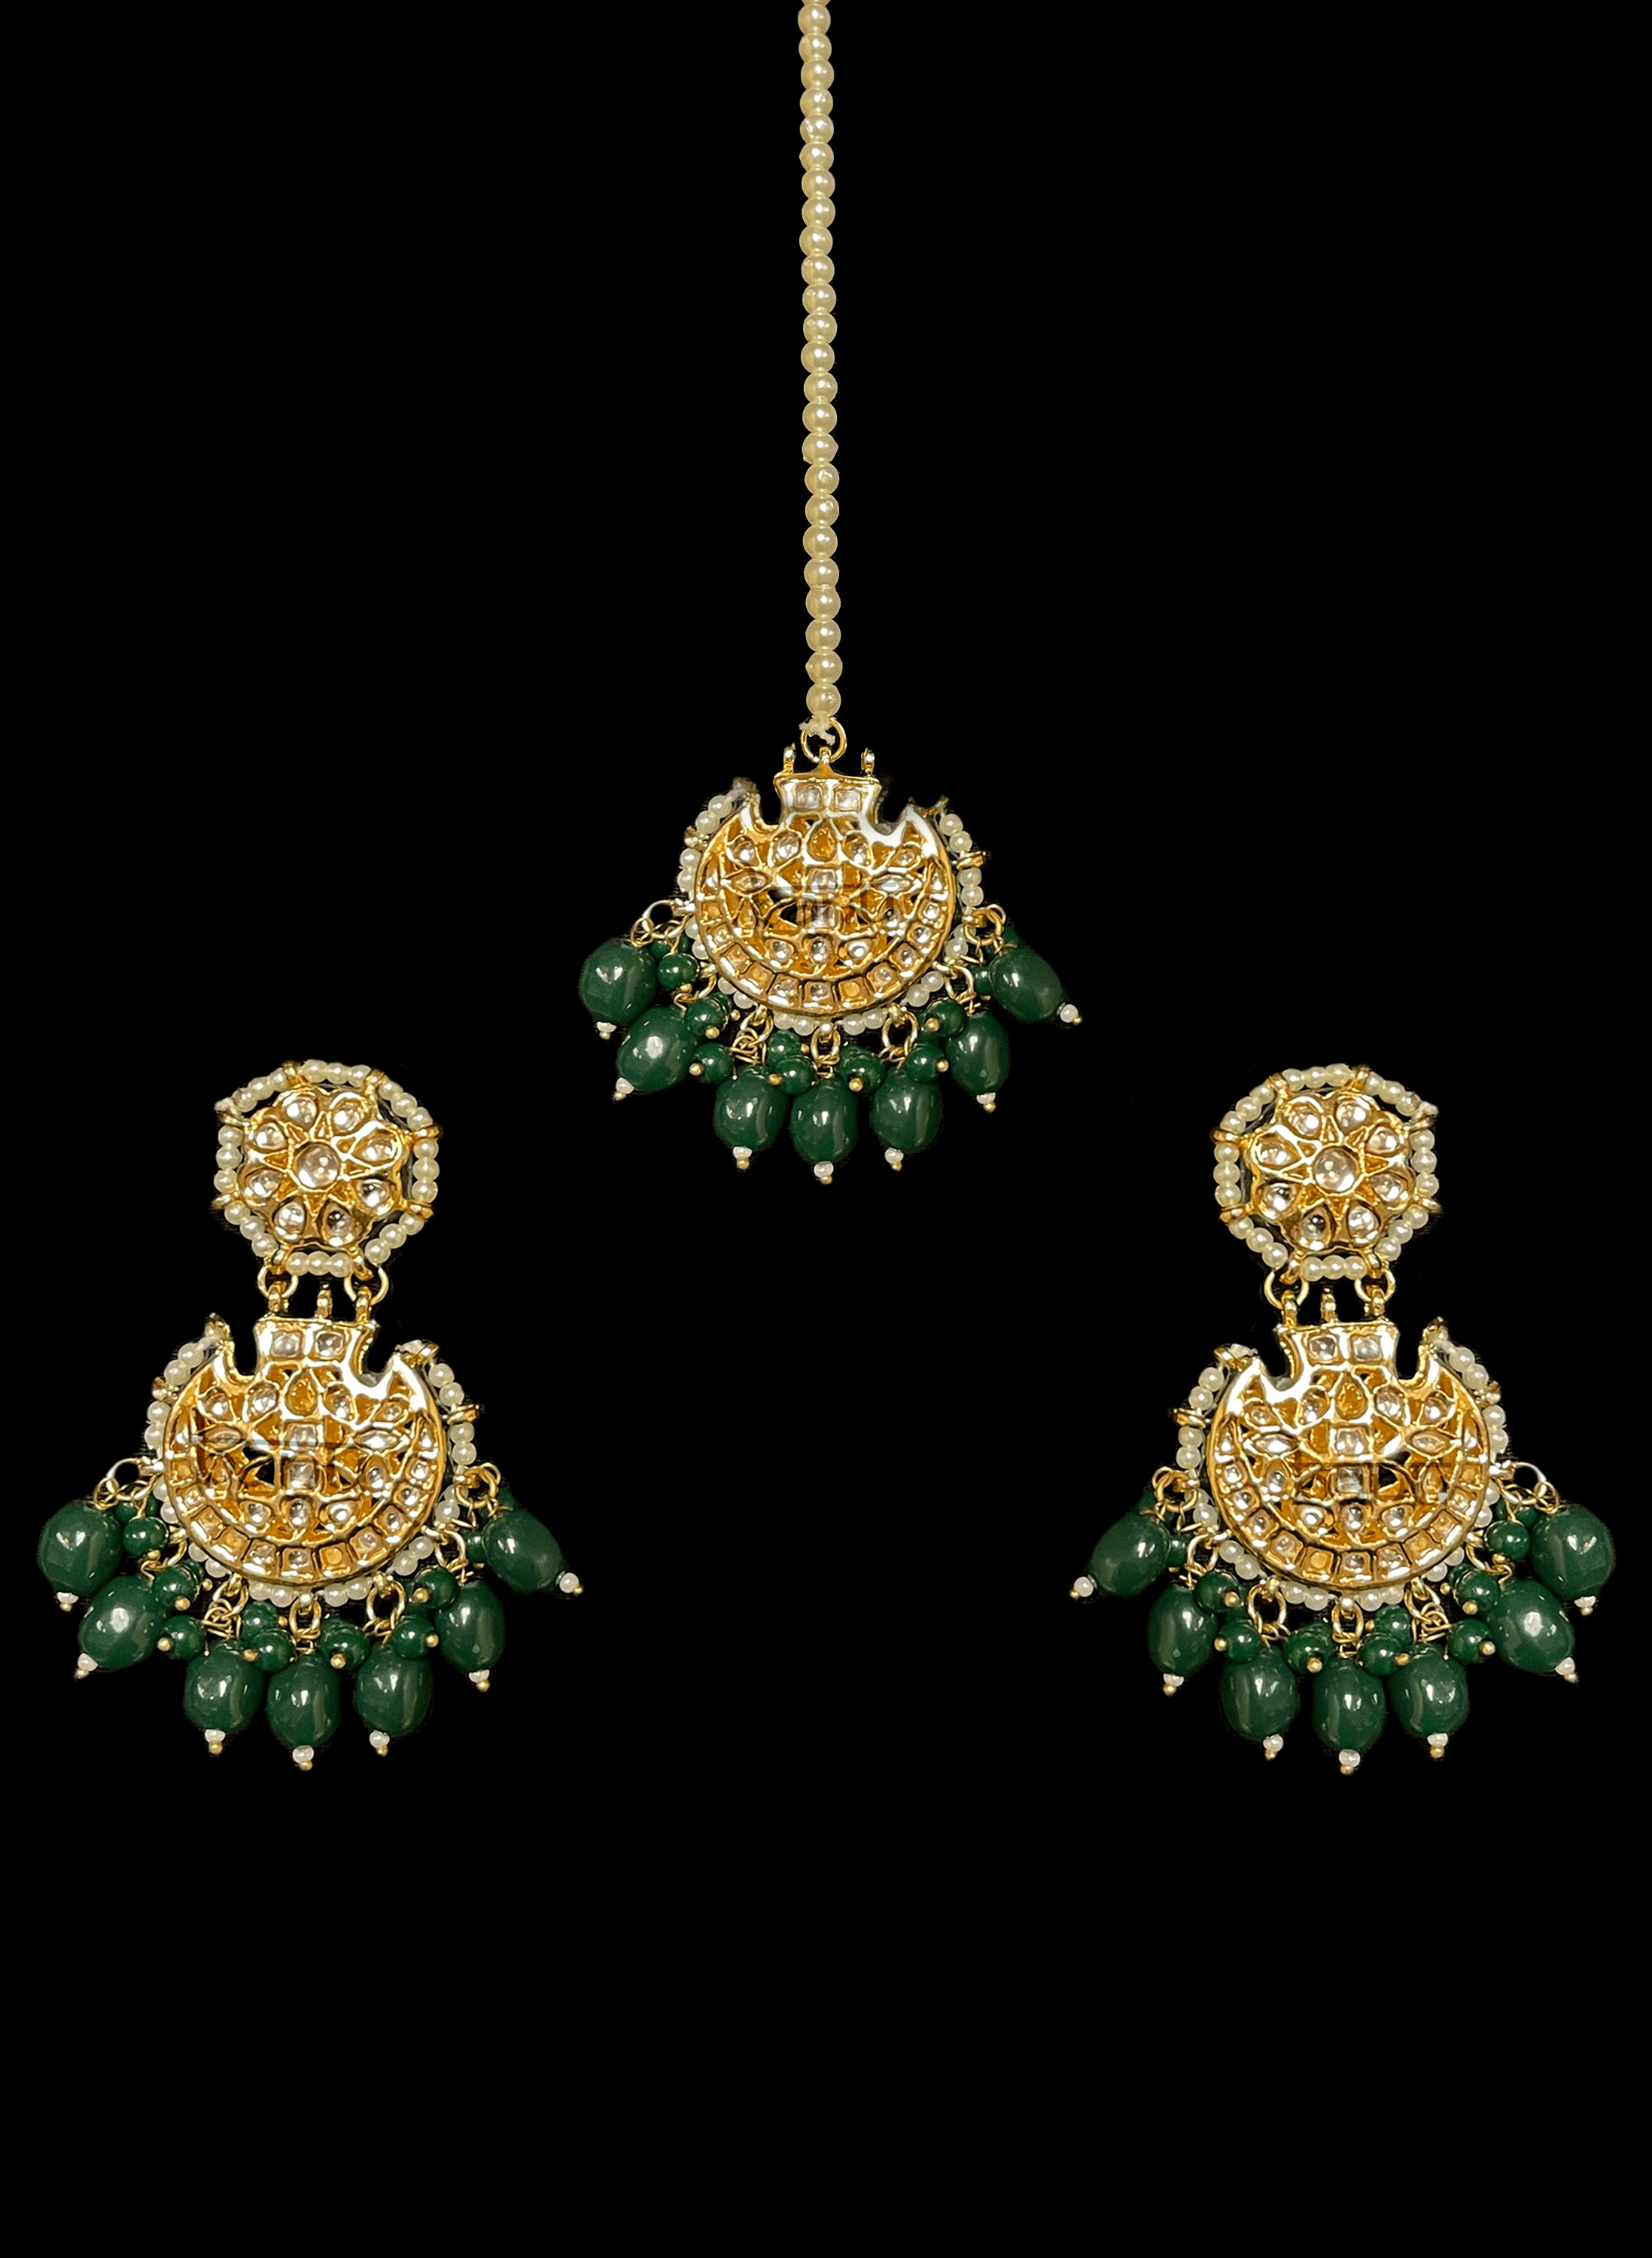 Pirus - Contemporary Indian Bridal Jewelry with Kundan, Pearls & Emerald